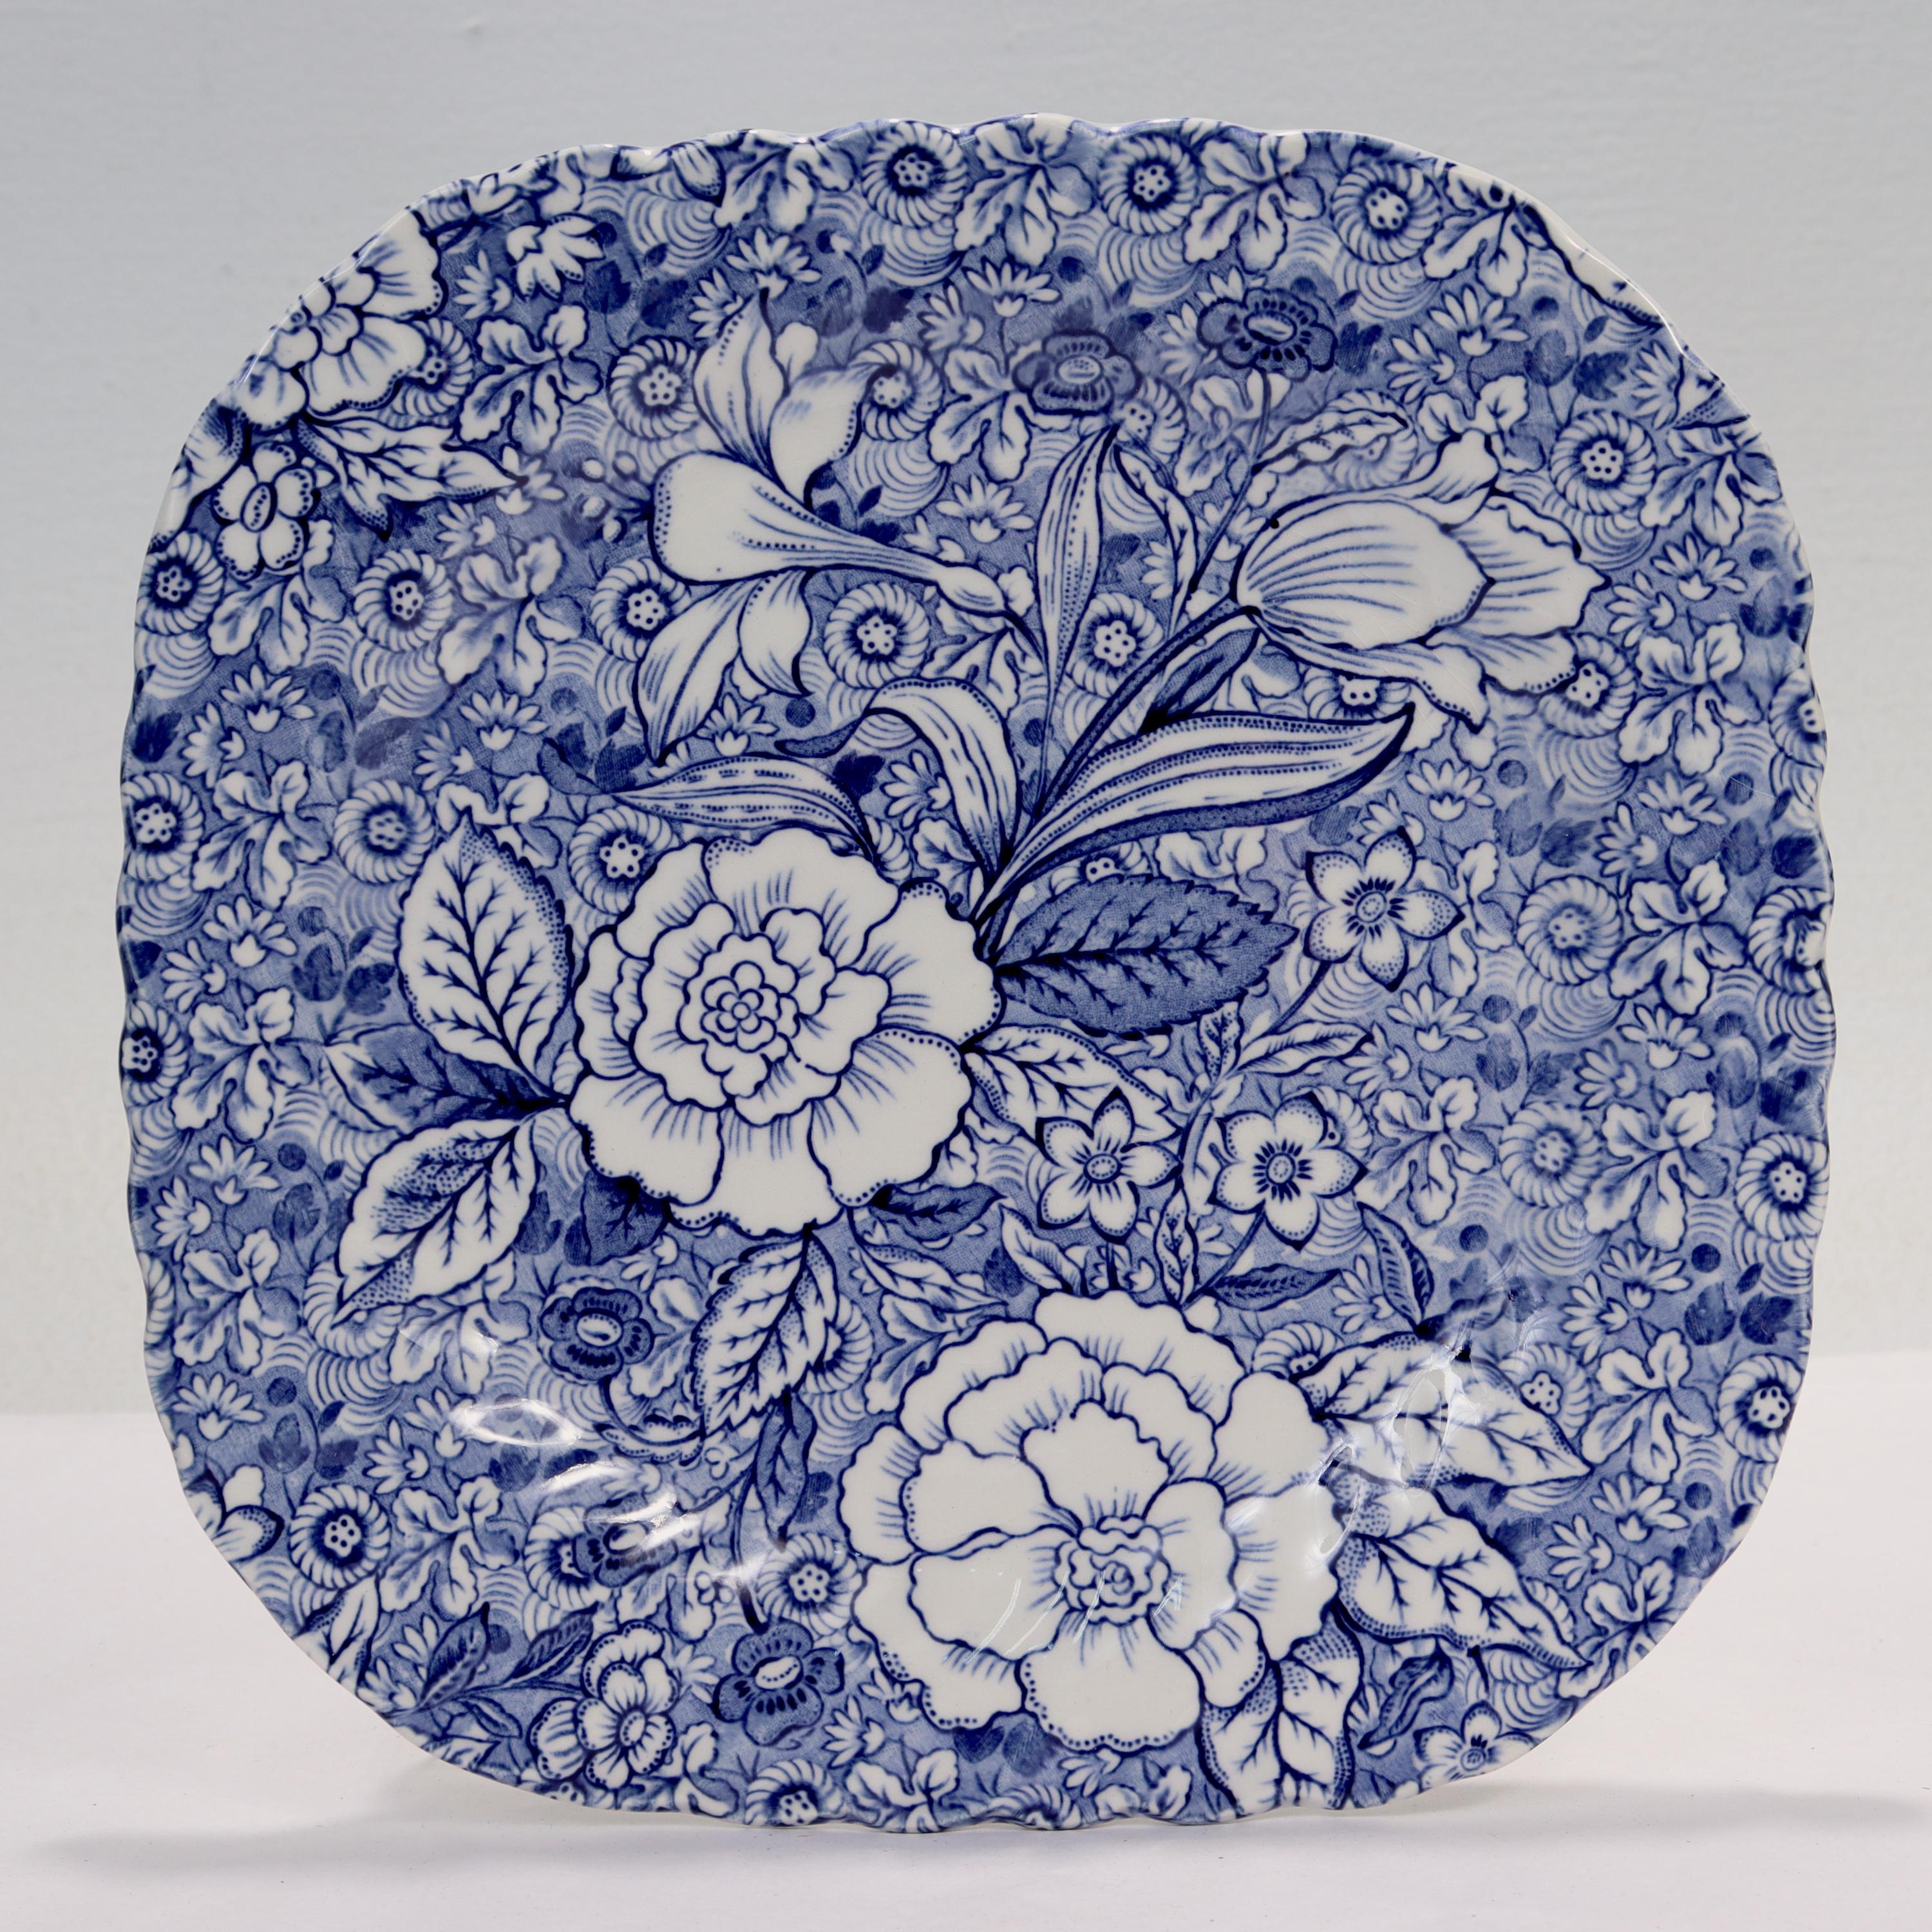 A fine set of chintz patterned ironstone plates by Johnson Brothers.

Made for Tiffany & Co.

This ornate blue floral chintz pattern is entitled 'Liberty'. 

These square plates serve as either salad or luncheon plates.

Perfect for the